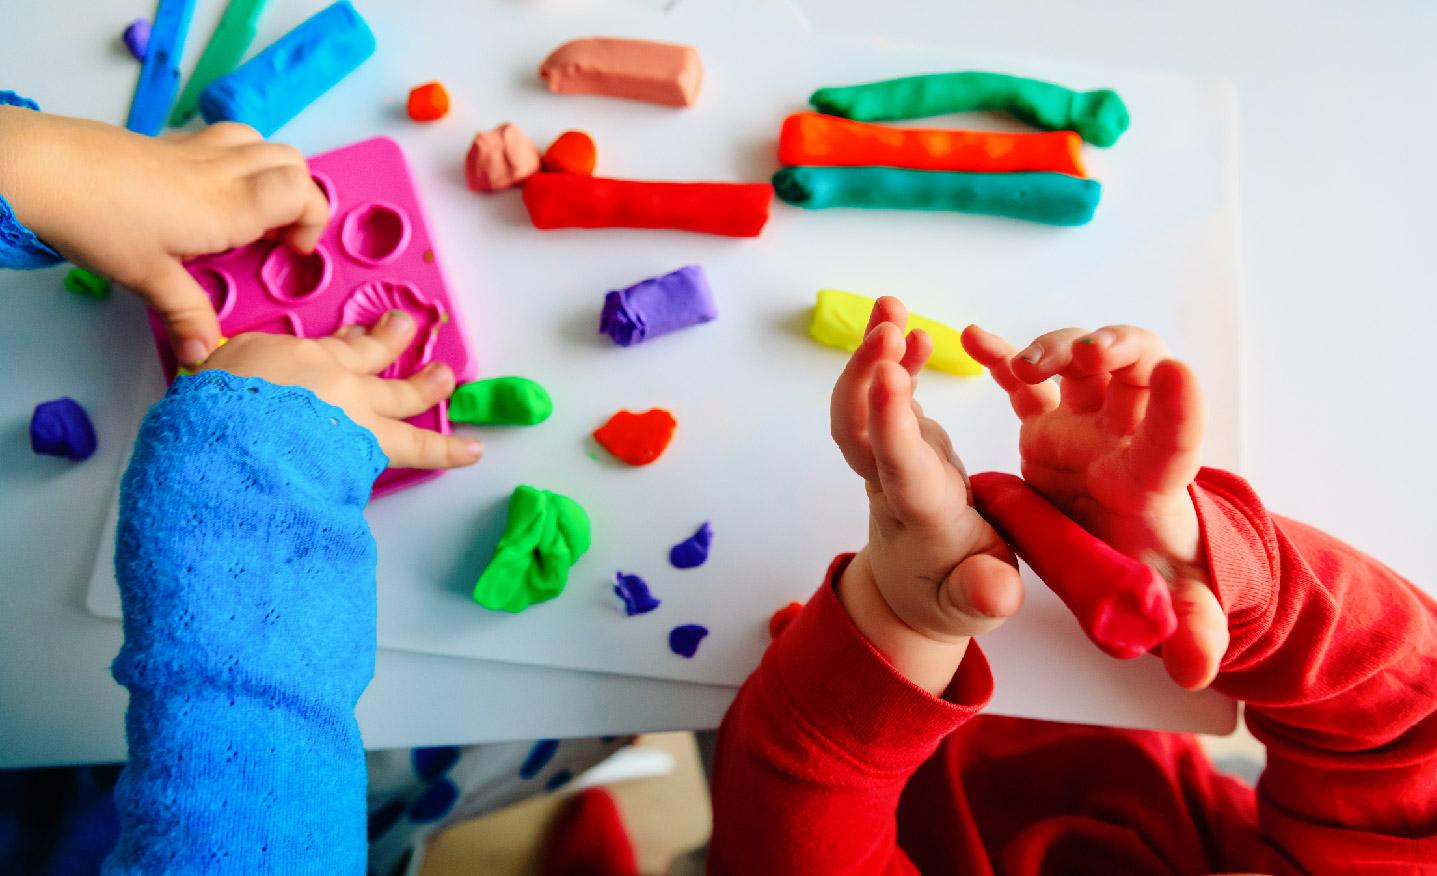 Clay Modelling For Kids. Here Are The Many Benefits Of Playing With Clay For Little Ones